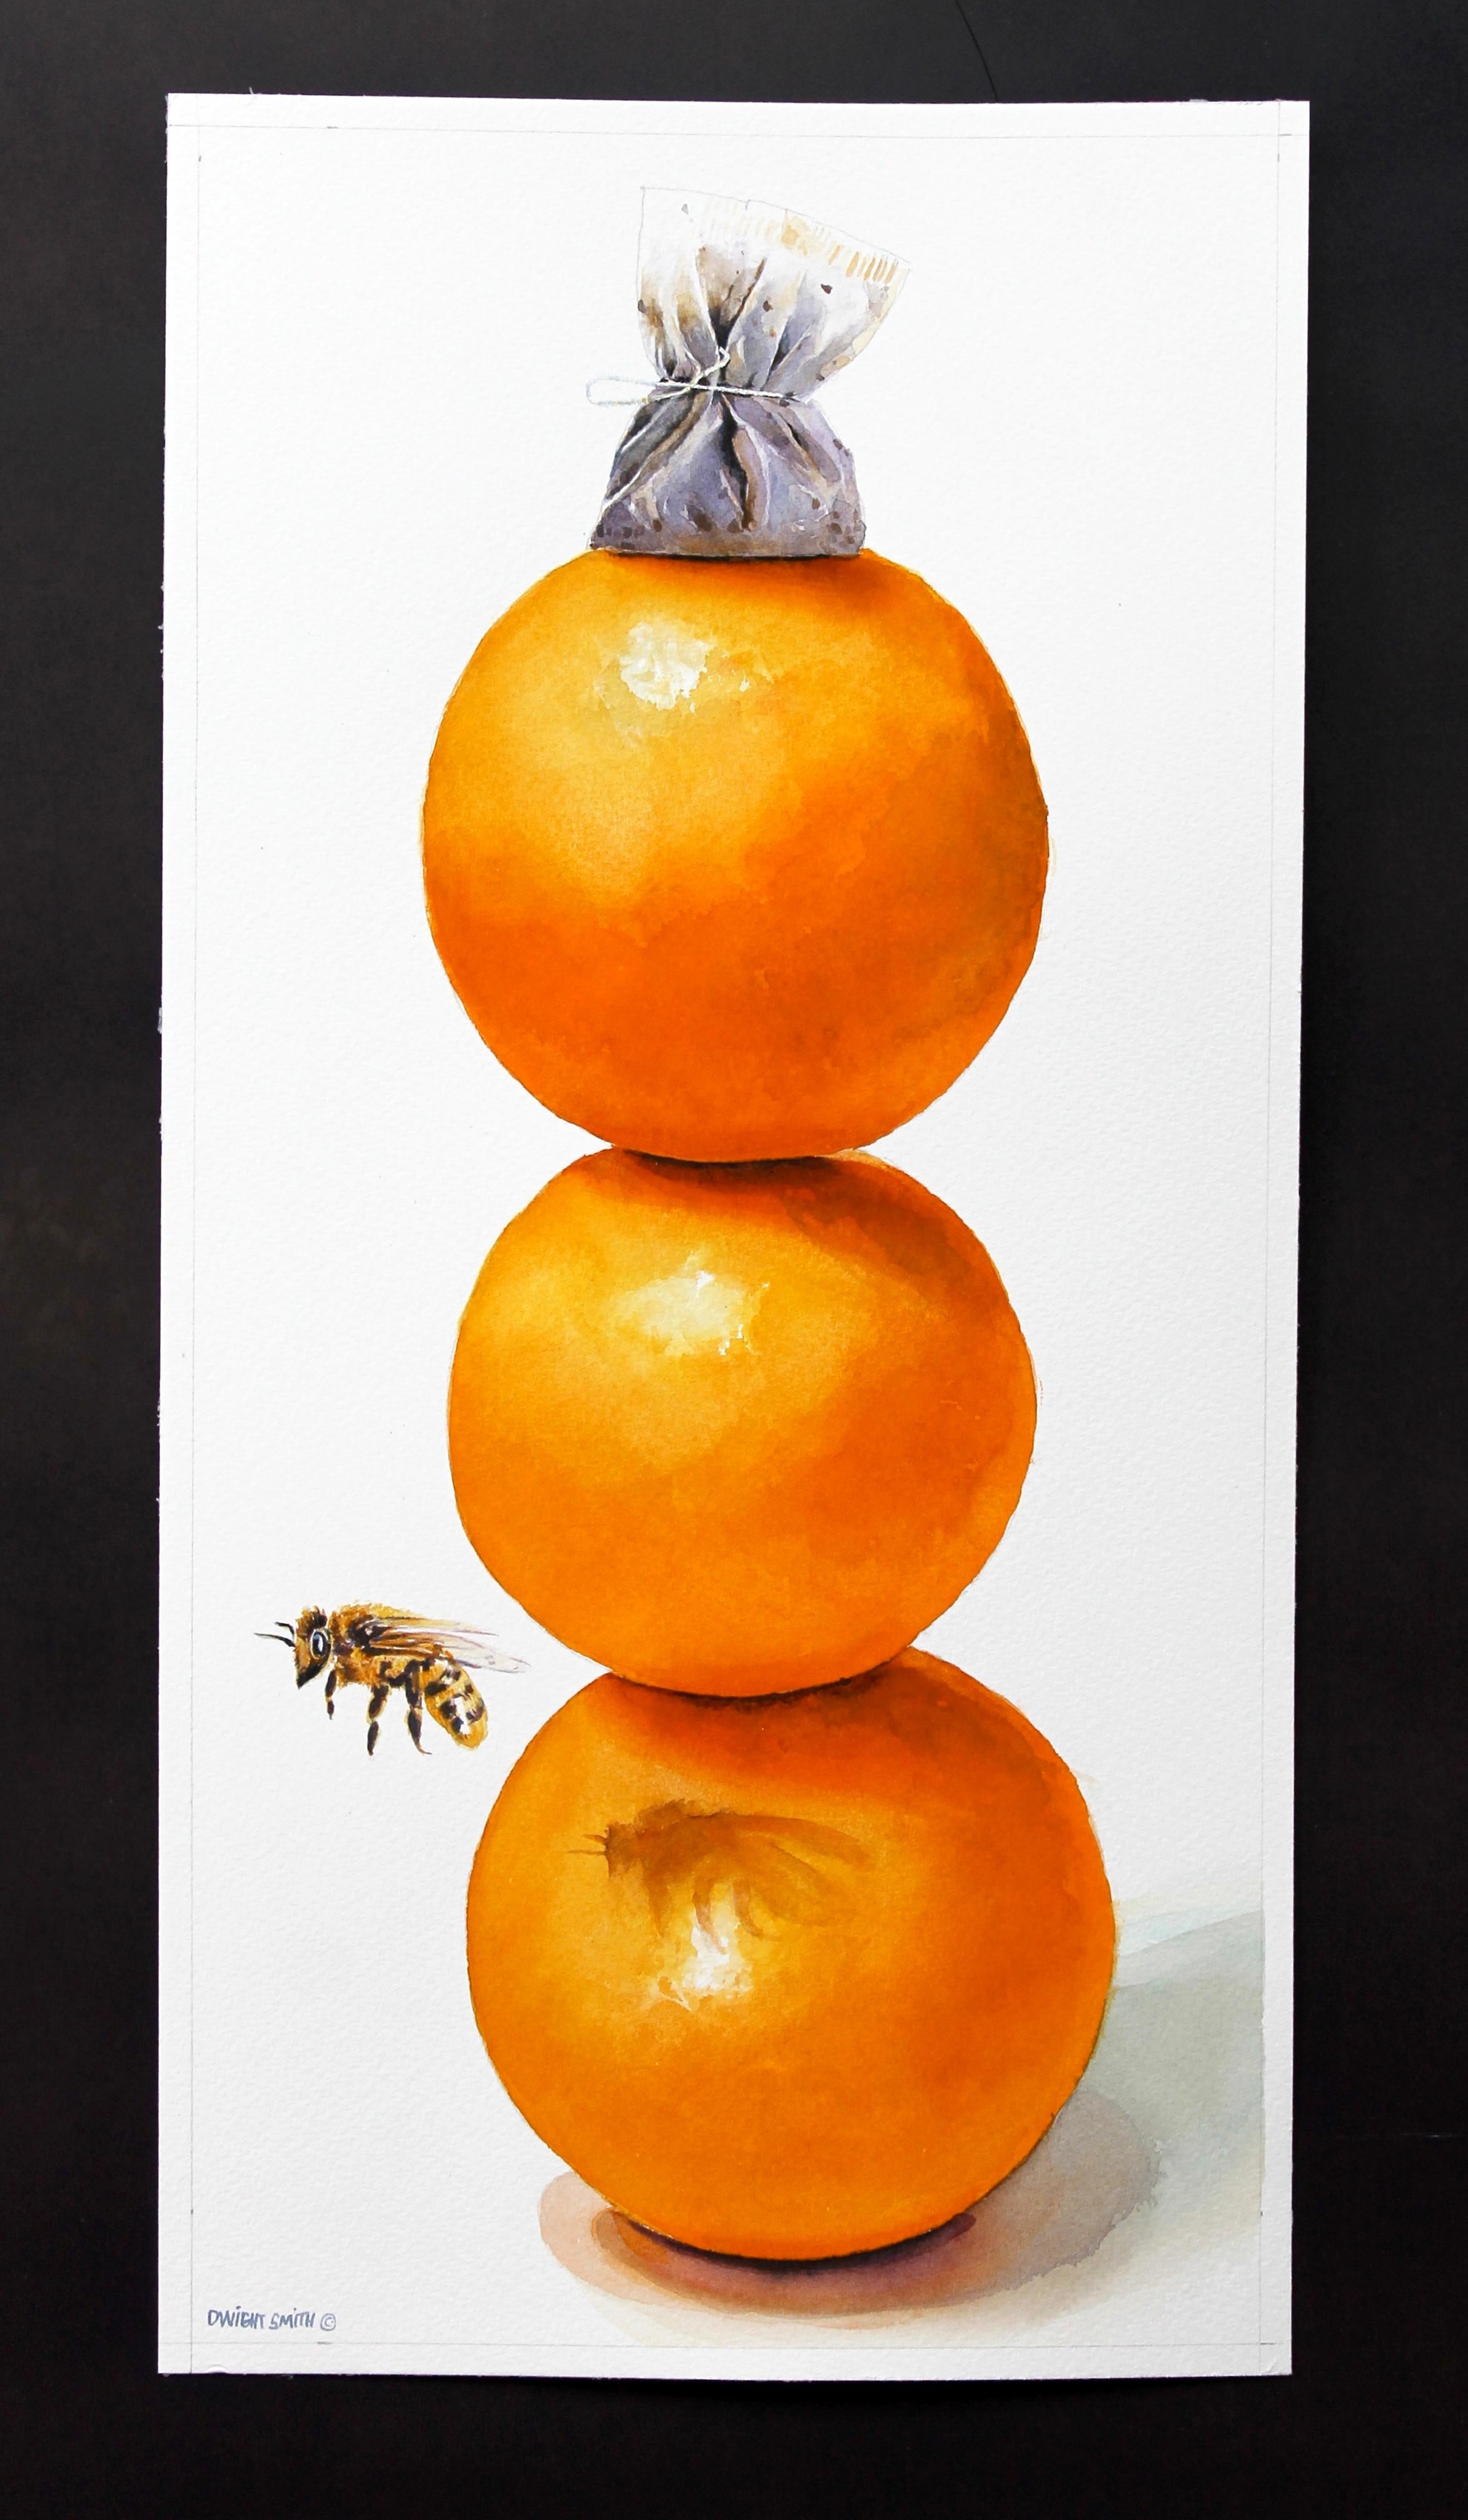 <p>Artist Comments<br>In this watercolor still life, a stack of large, plump oranges forms a column, with a tea bag resting on top. A honey bee buzzes by, leaving its shadow on the fruit. The composition plays with vibrant citrus tones and subdued